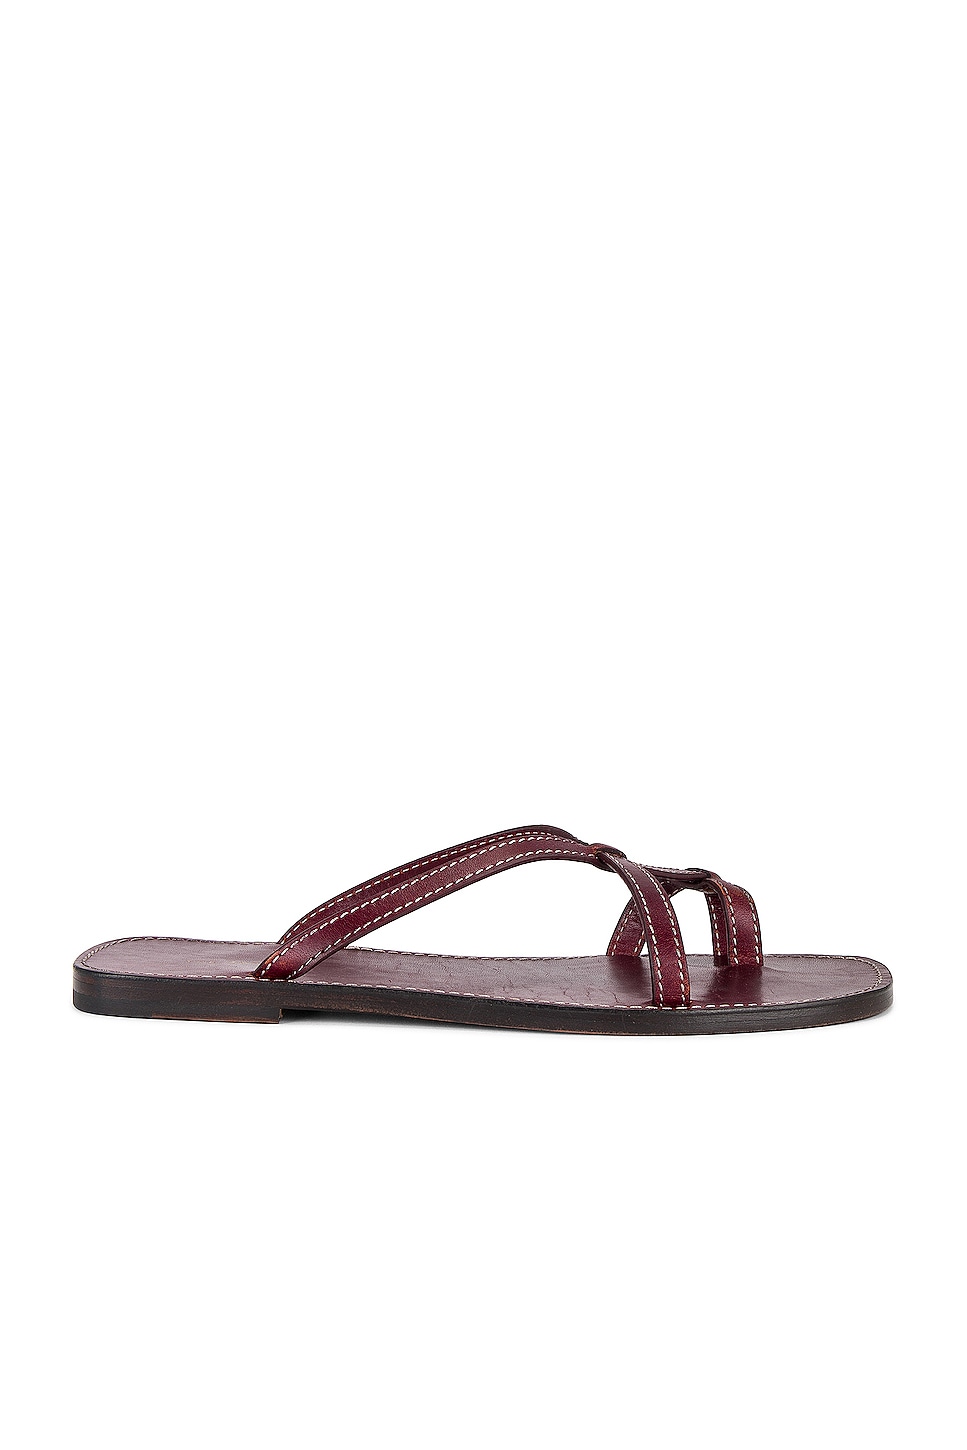 Image 1 of The Row Link Sandal in FRAMBOISE